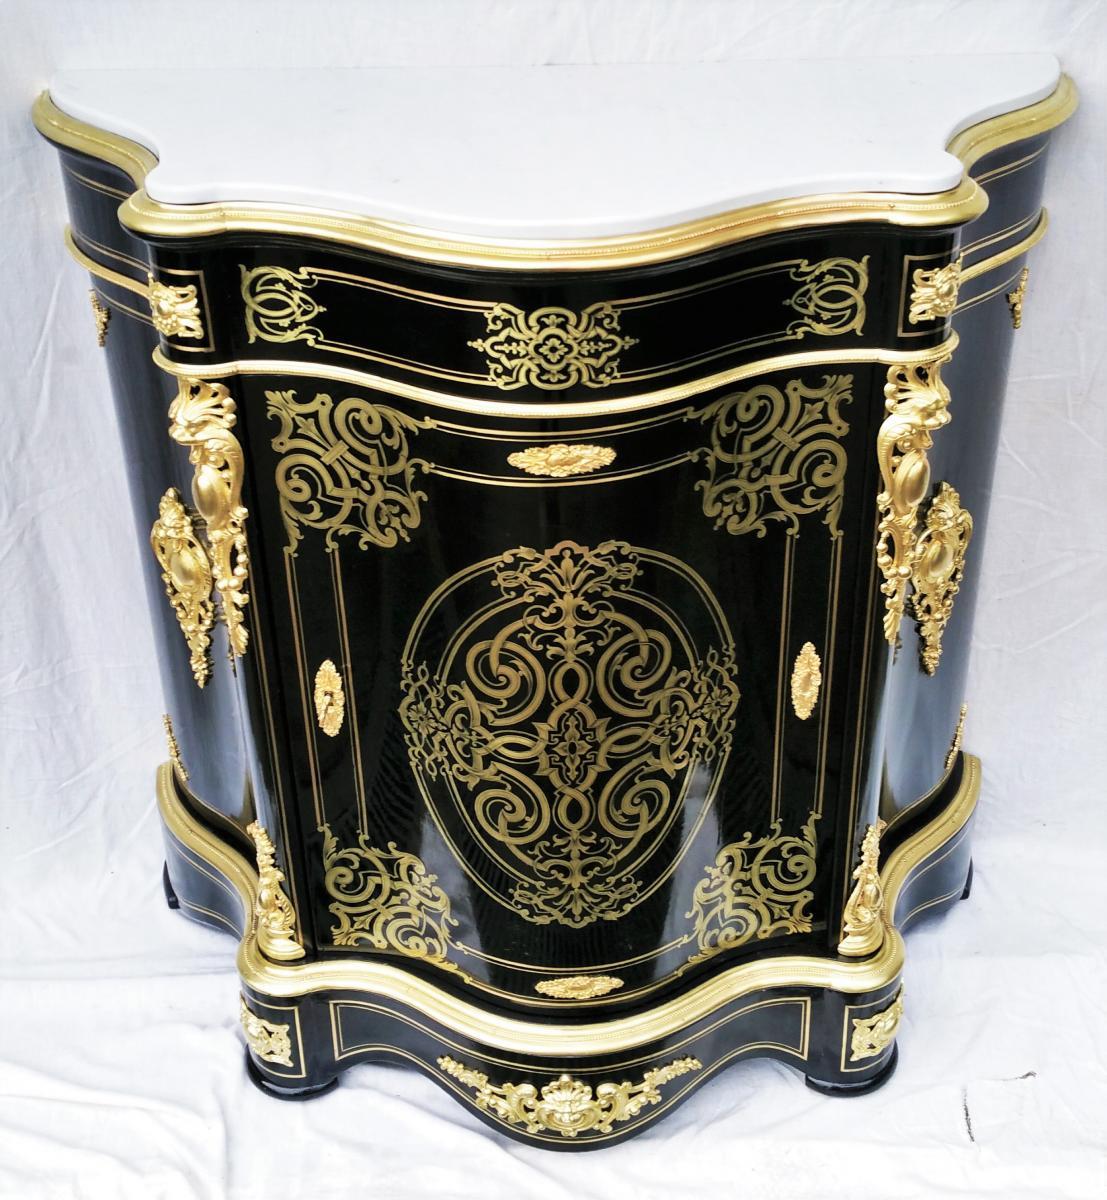 Napoleon III Curved Unique Cabinet in Boulle Marquetry, France, 19th Century (Geschwärzt)